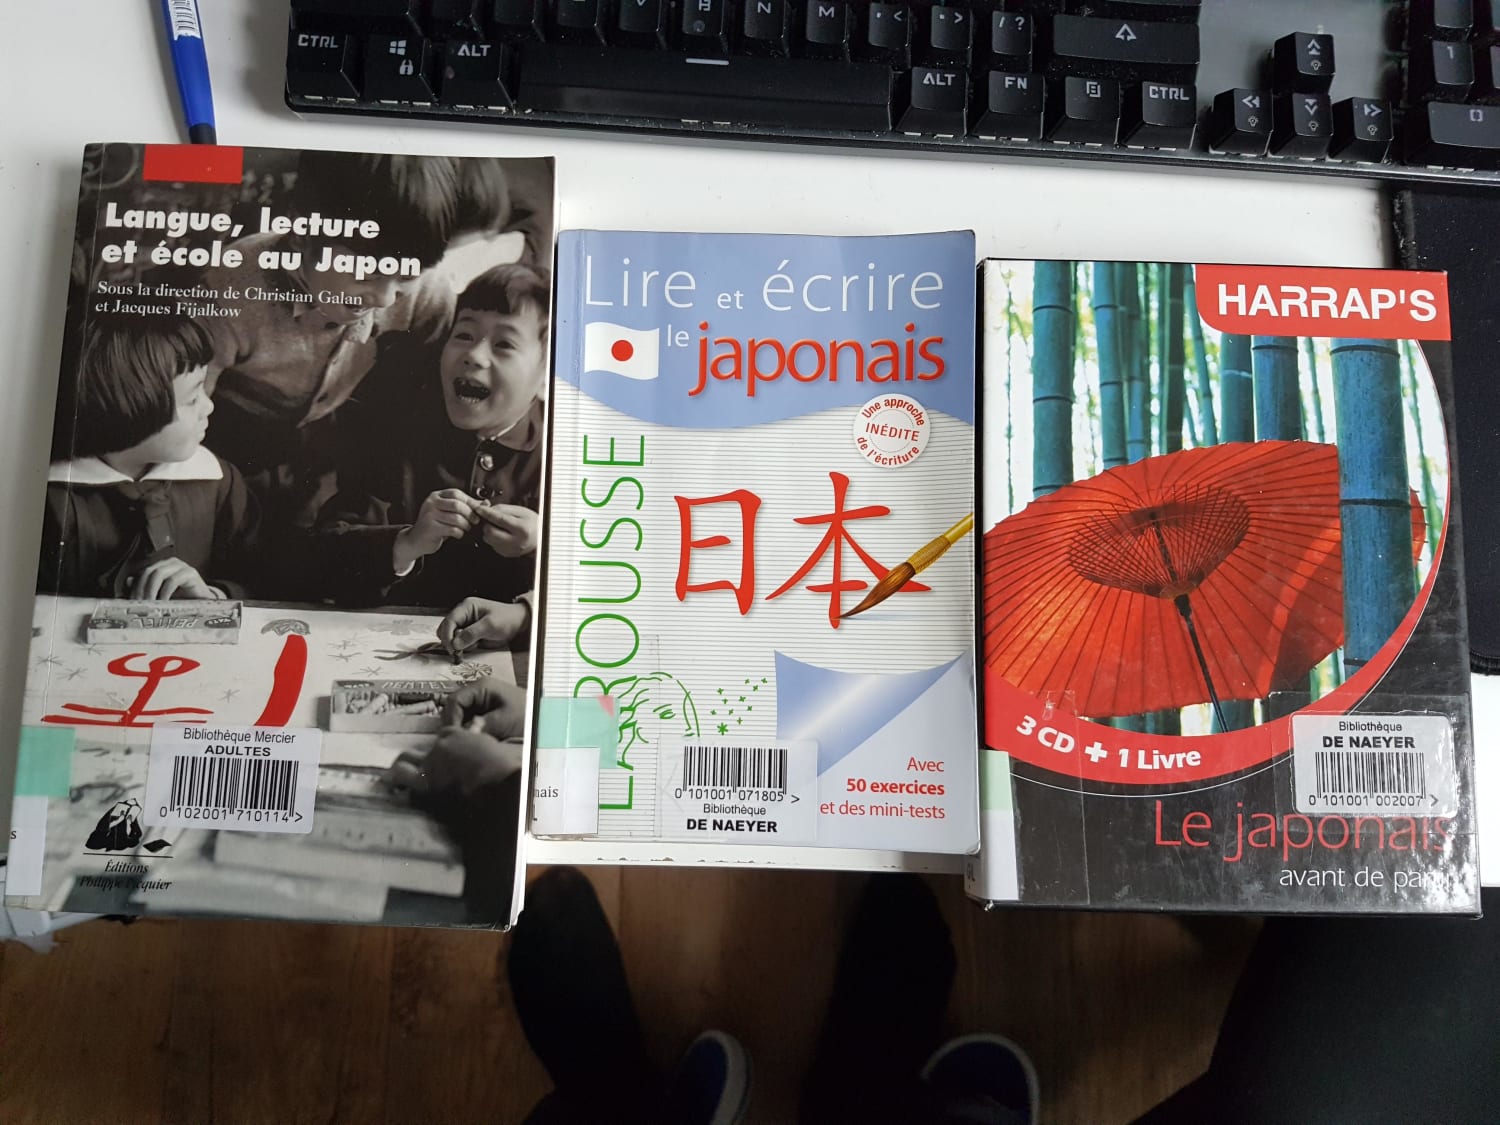 I've just started learning japanese, wish me luck guys !